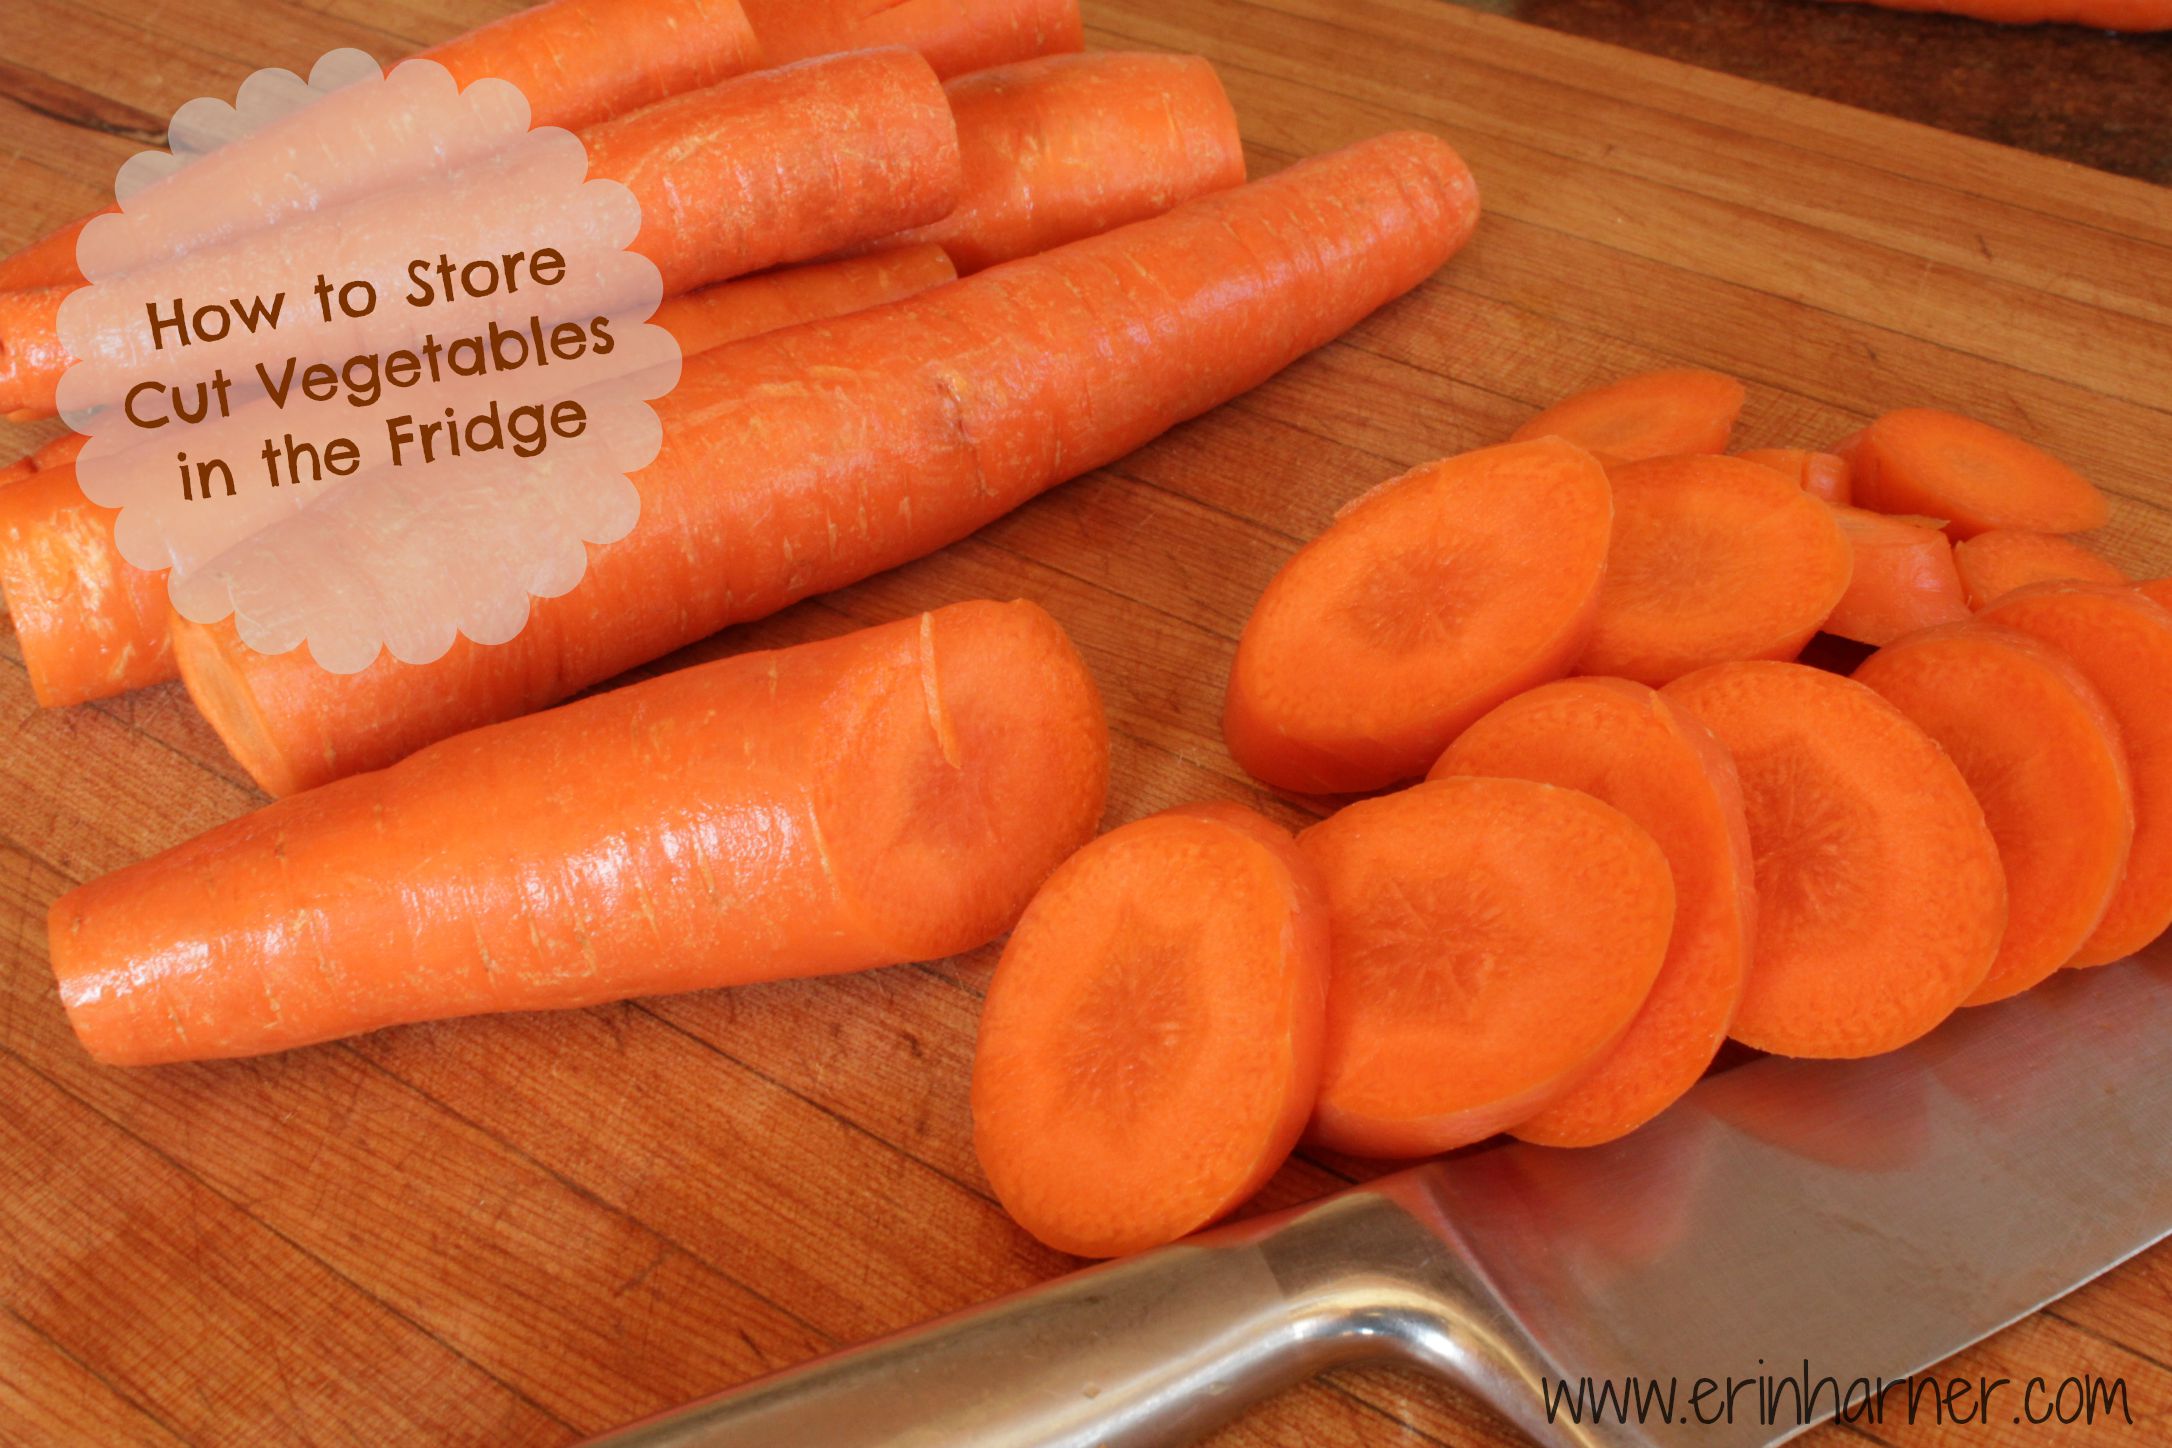 How to Store Cut Vegetables in the Fridge - Erin Harner